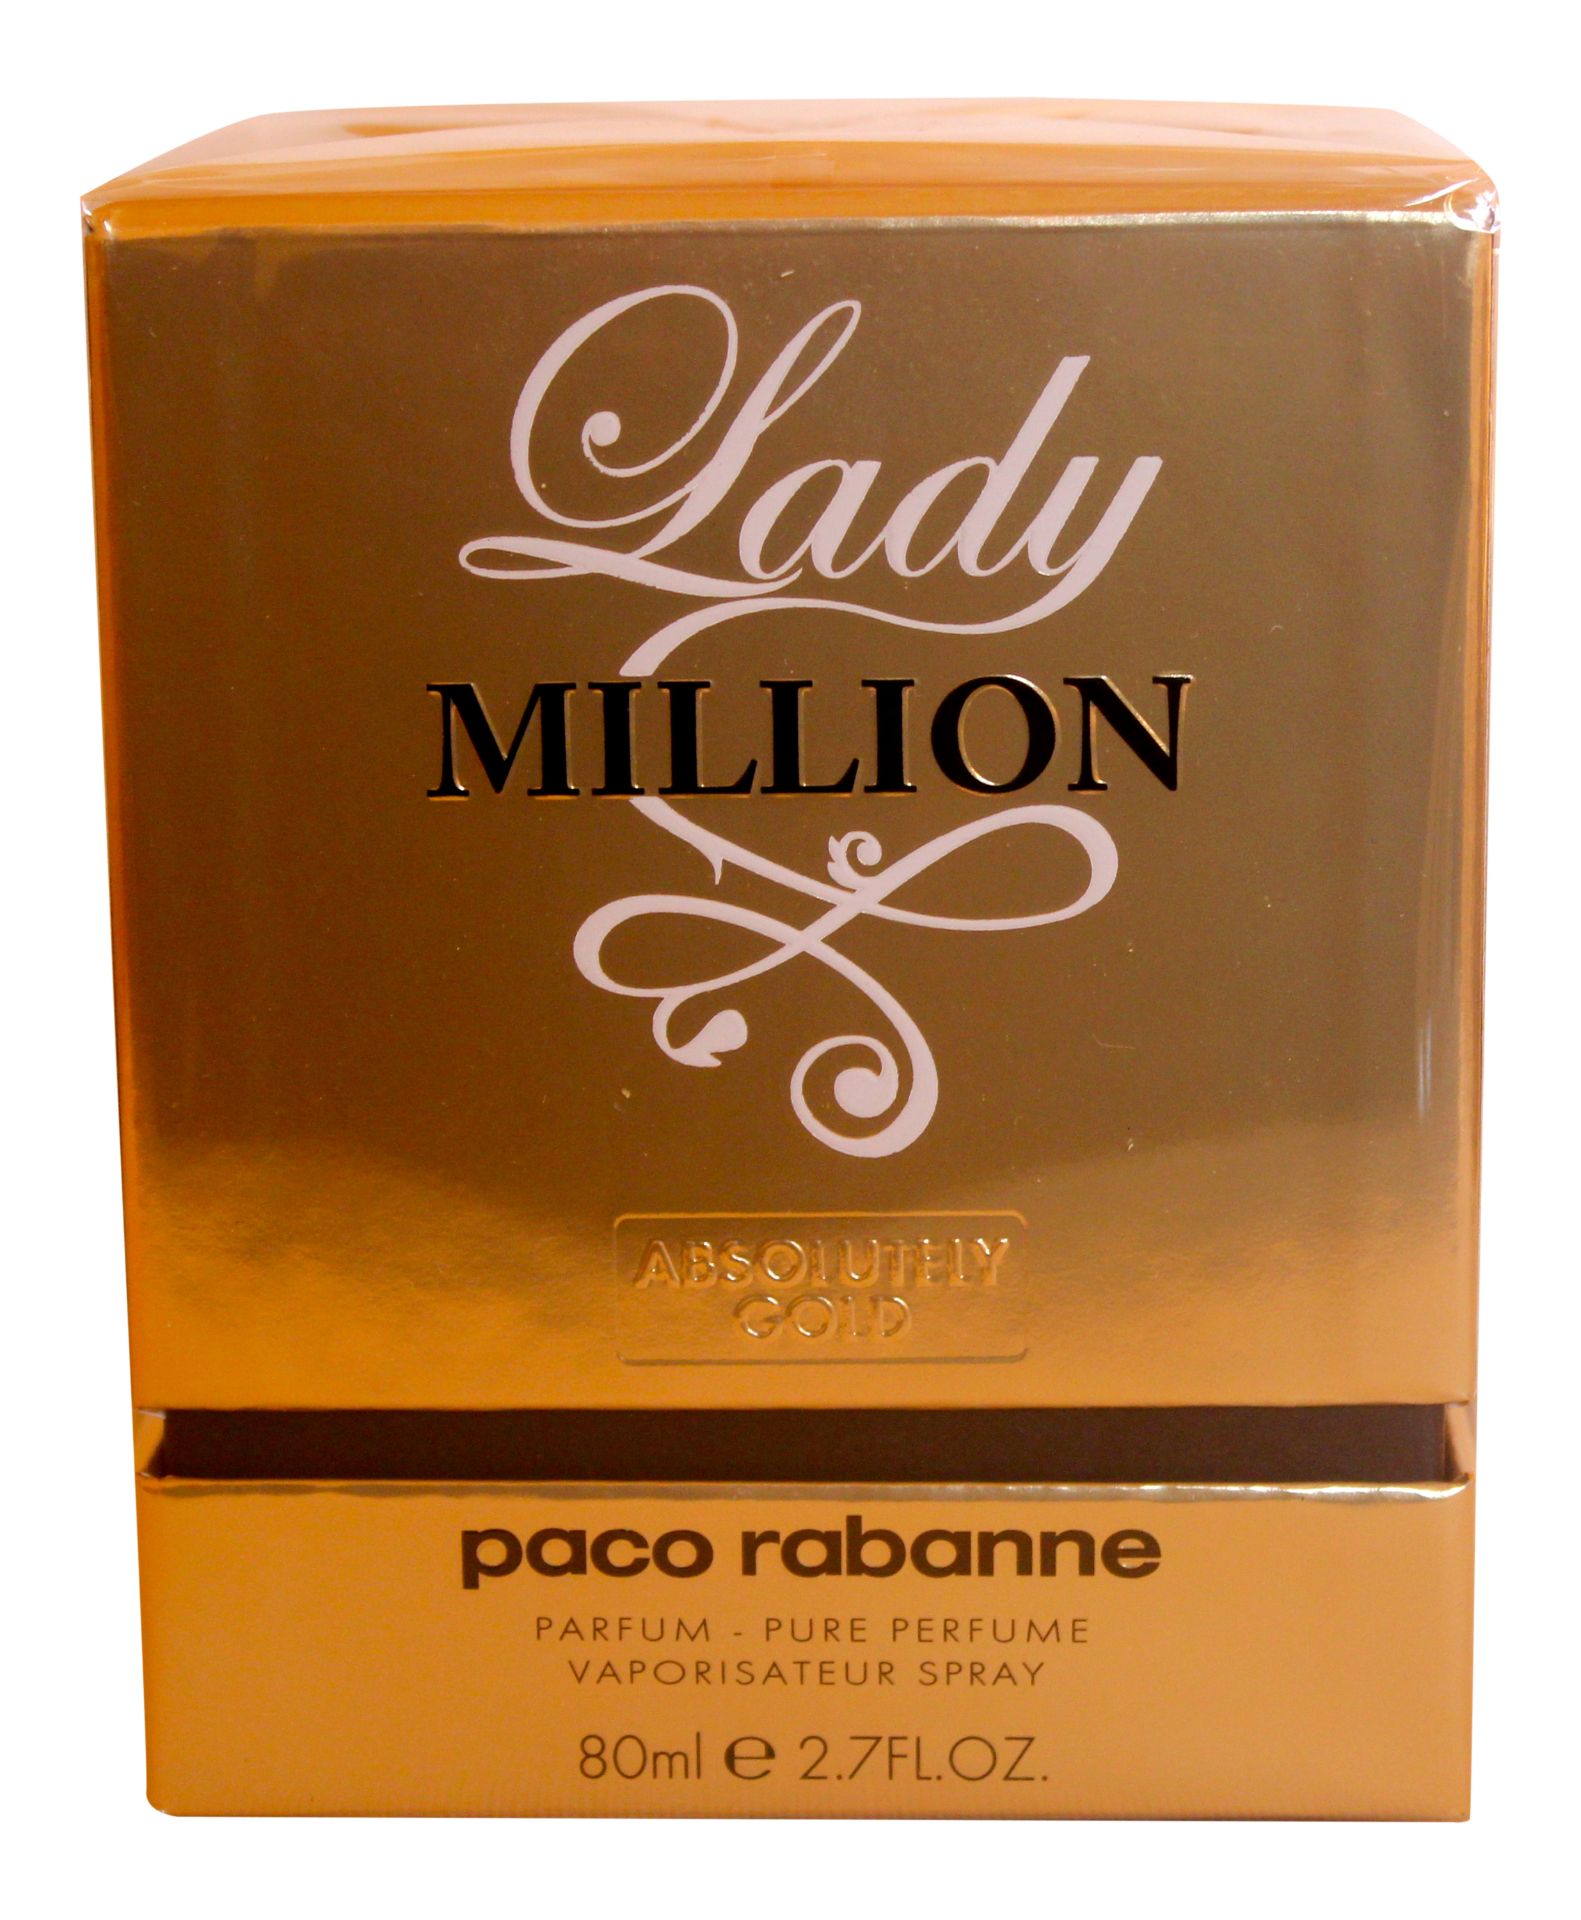 Paco Rabanne Lady Million Absolutely Gold 80ml Pure Perfume Spray for Women x 1 Unit - Image 3 of 3